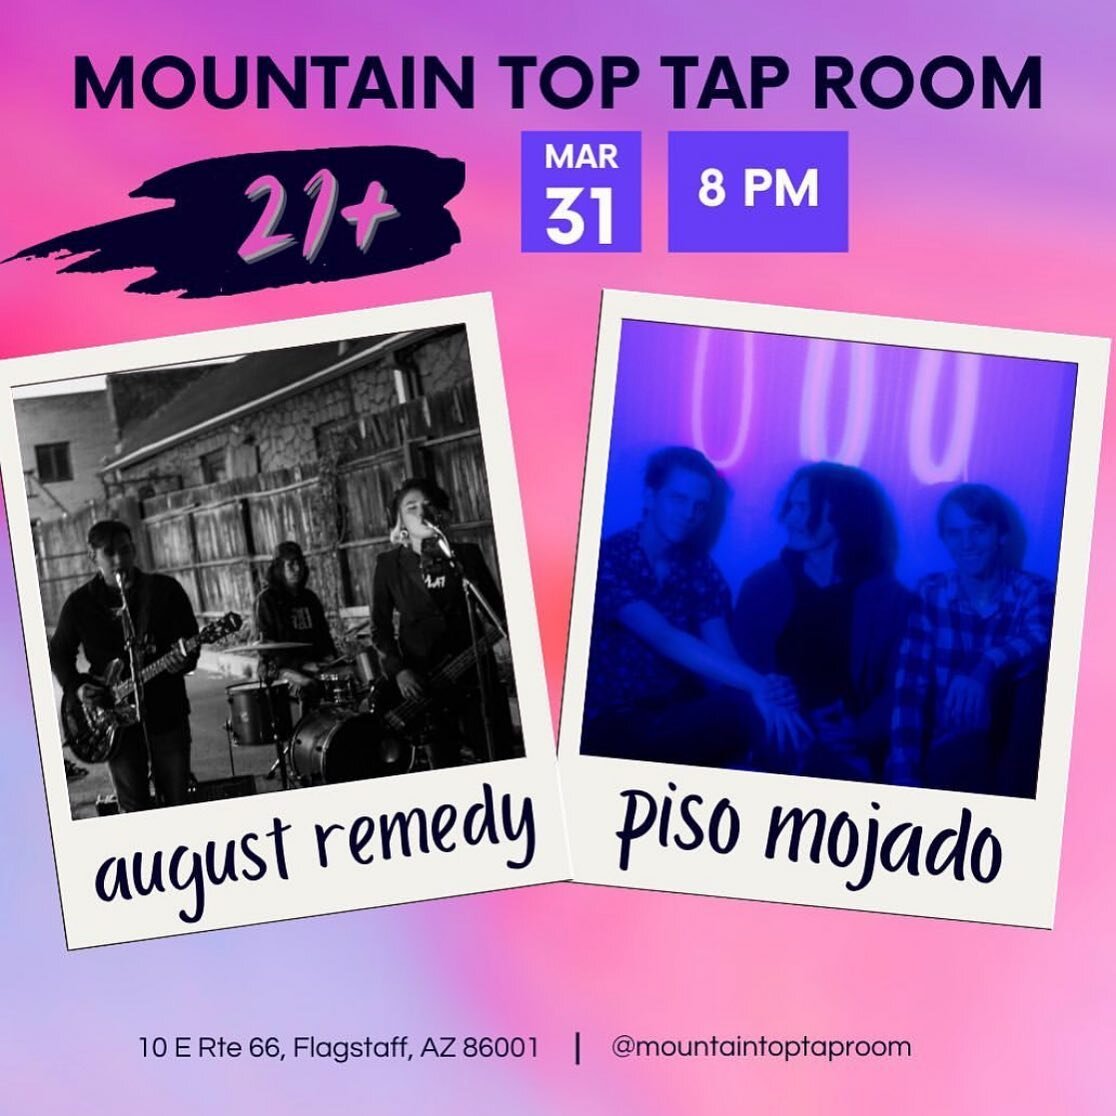 Come see @pisomojadomusic and @august_remedy tomorrow night at 8! 🎉 As always, no cover charge (cause we love you guys)